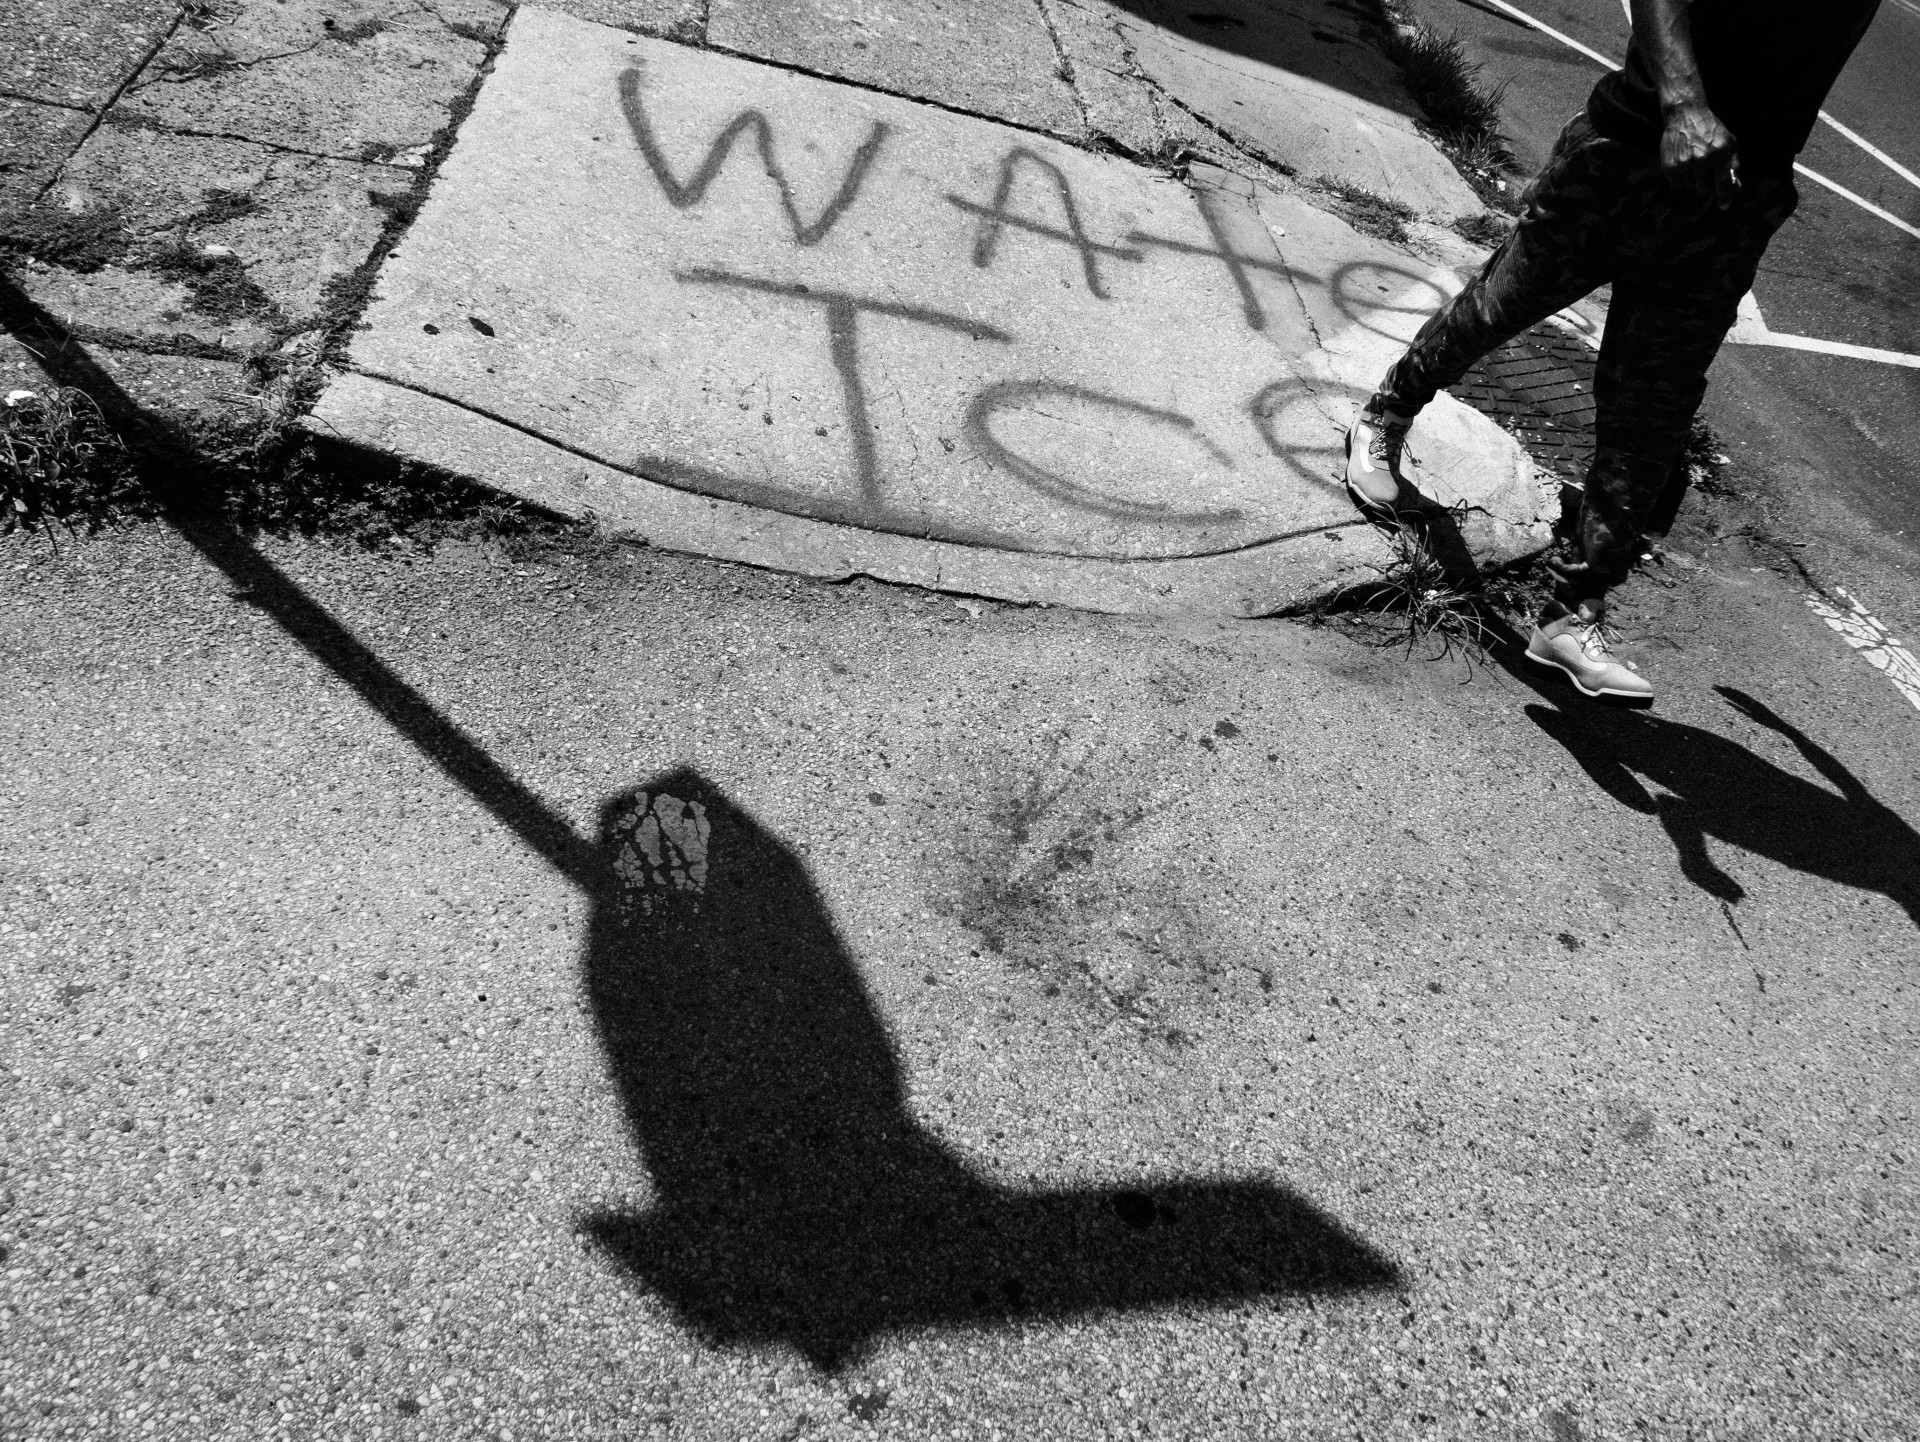 A black-and-white photo of a street corner. The photo is shot from above, it shows a sidewalk curb, a stop sign shadow, and a man walking. Graffitied on the sidewalk are the words "water ice".